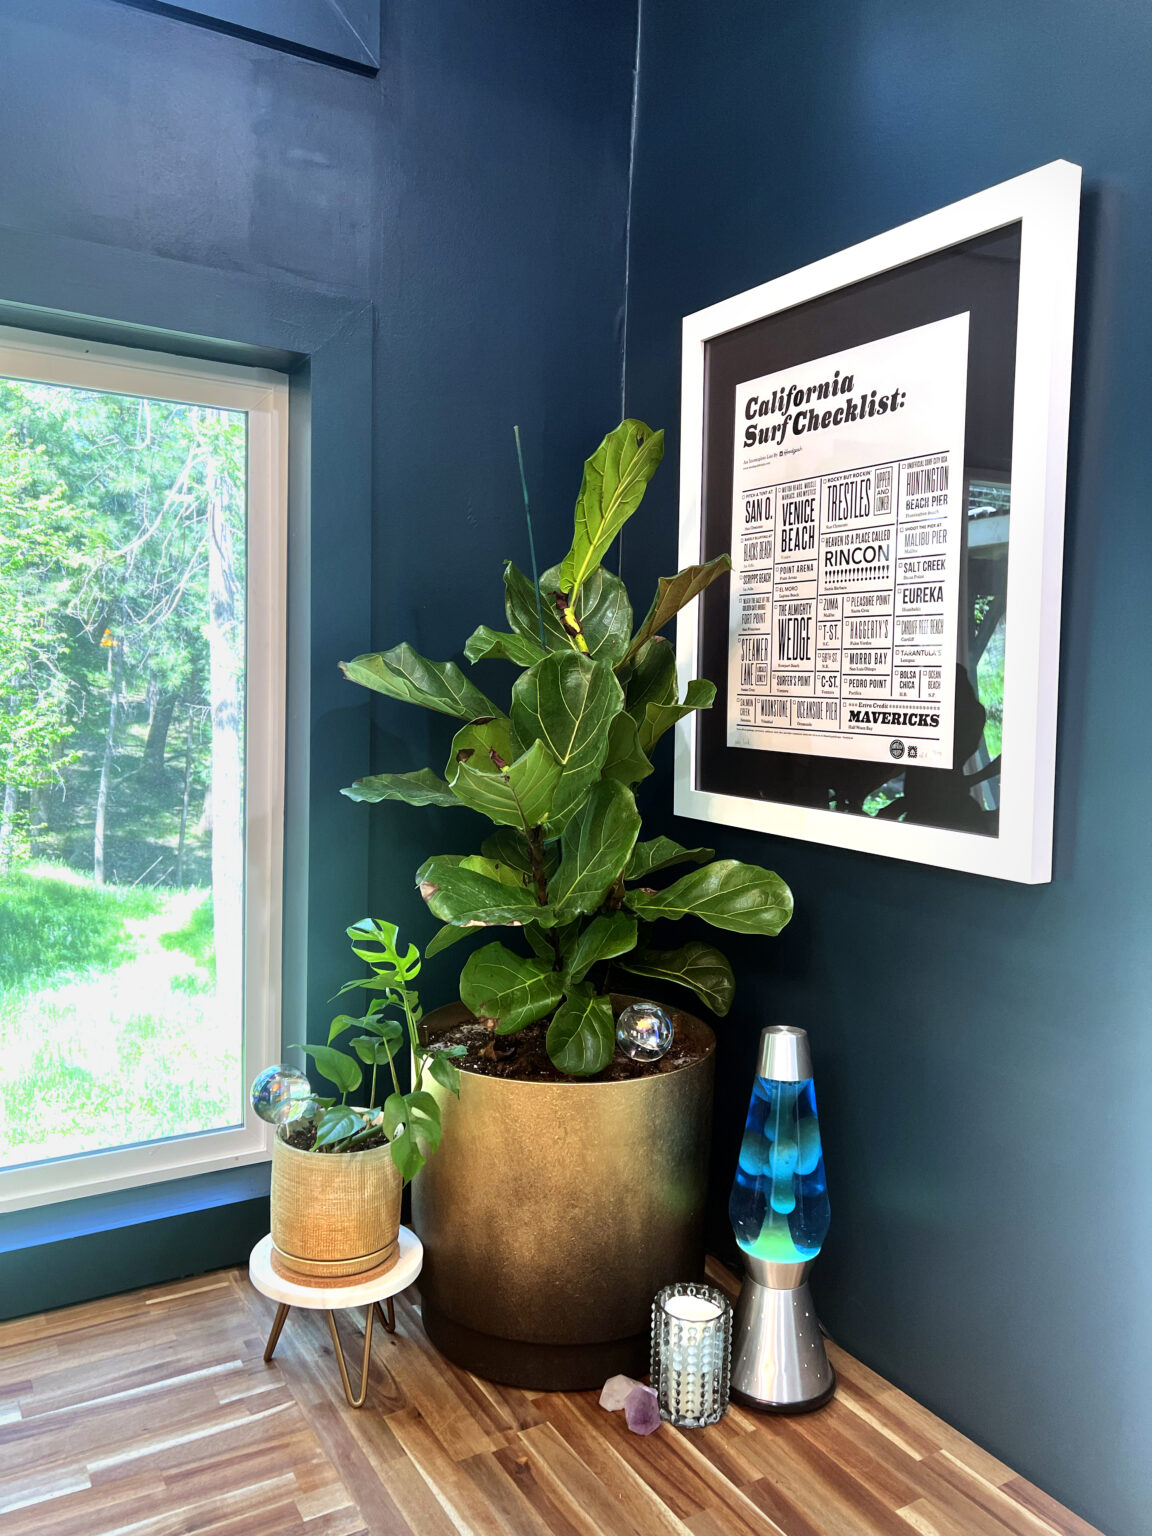 Surf checklist poster framed on a wall with potted plants